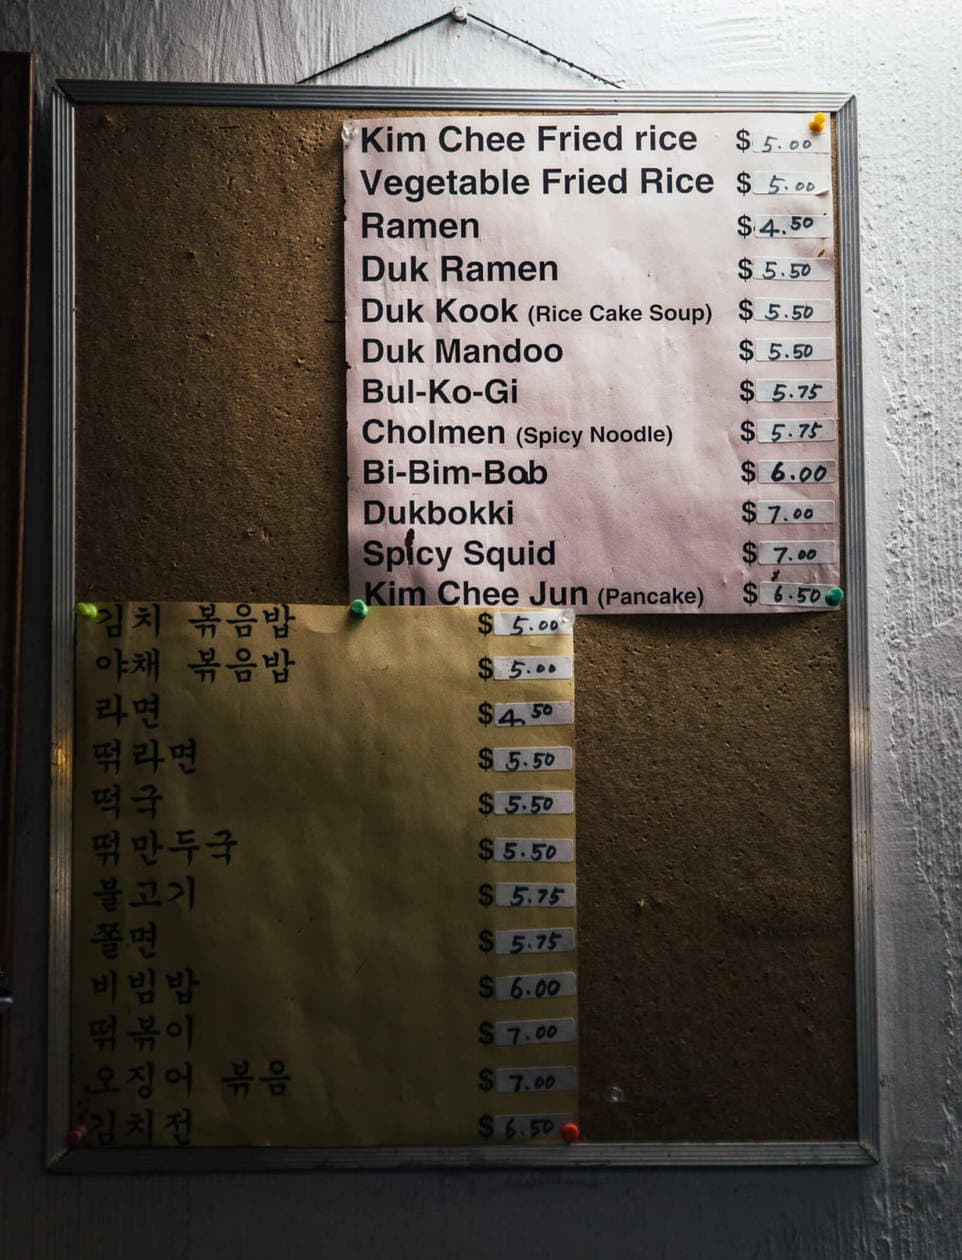 Visit this unique hole in the wall restaurant for some of the best cheap eats in Honolulu. With an eclectic storefront, $5 dishes entrees and kimchee pancakes to die for, Sidewalk Deli is a must try restaurant for homemade, delicious food in Chinatown. 